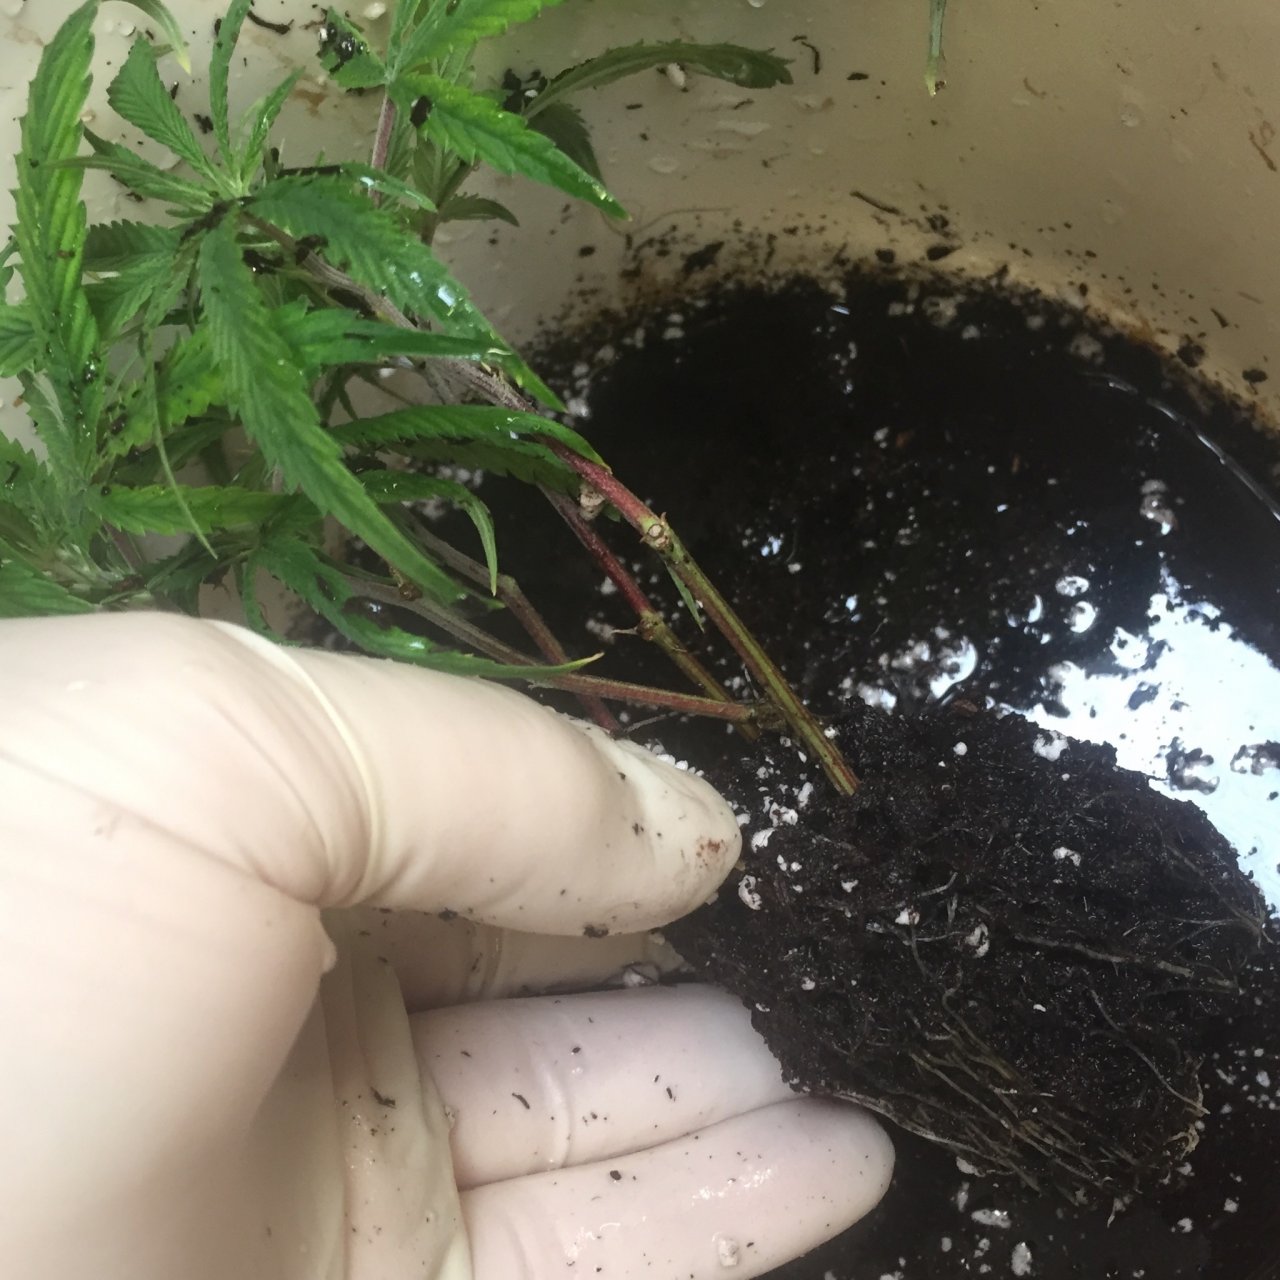 Rinsing soil off roots